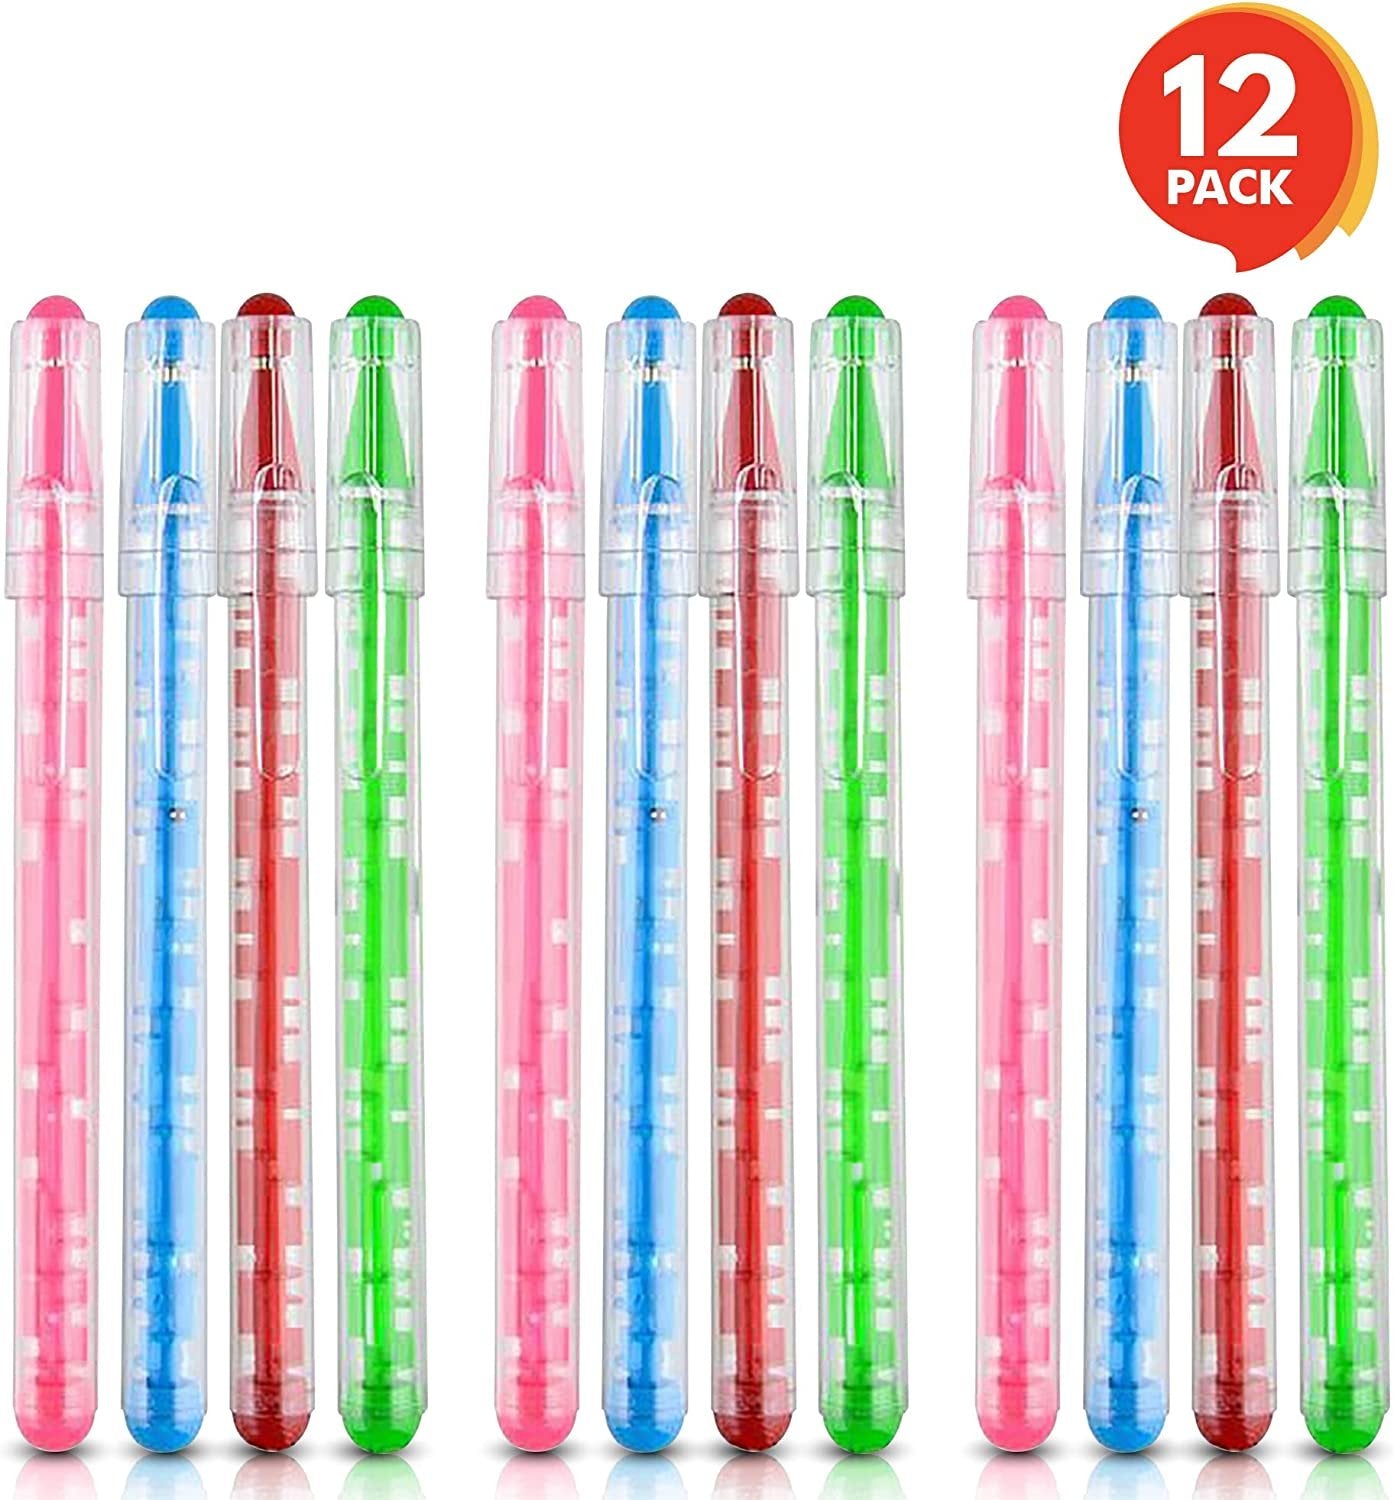 Gamie Maze Puzzle Novelty Pens for Kids and Adults - Pack of 12 - Pens with Built-in Ball Maze - Fidget Toy for Stress Relief - School and Office